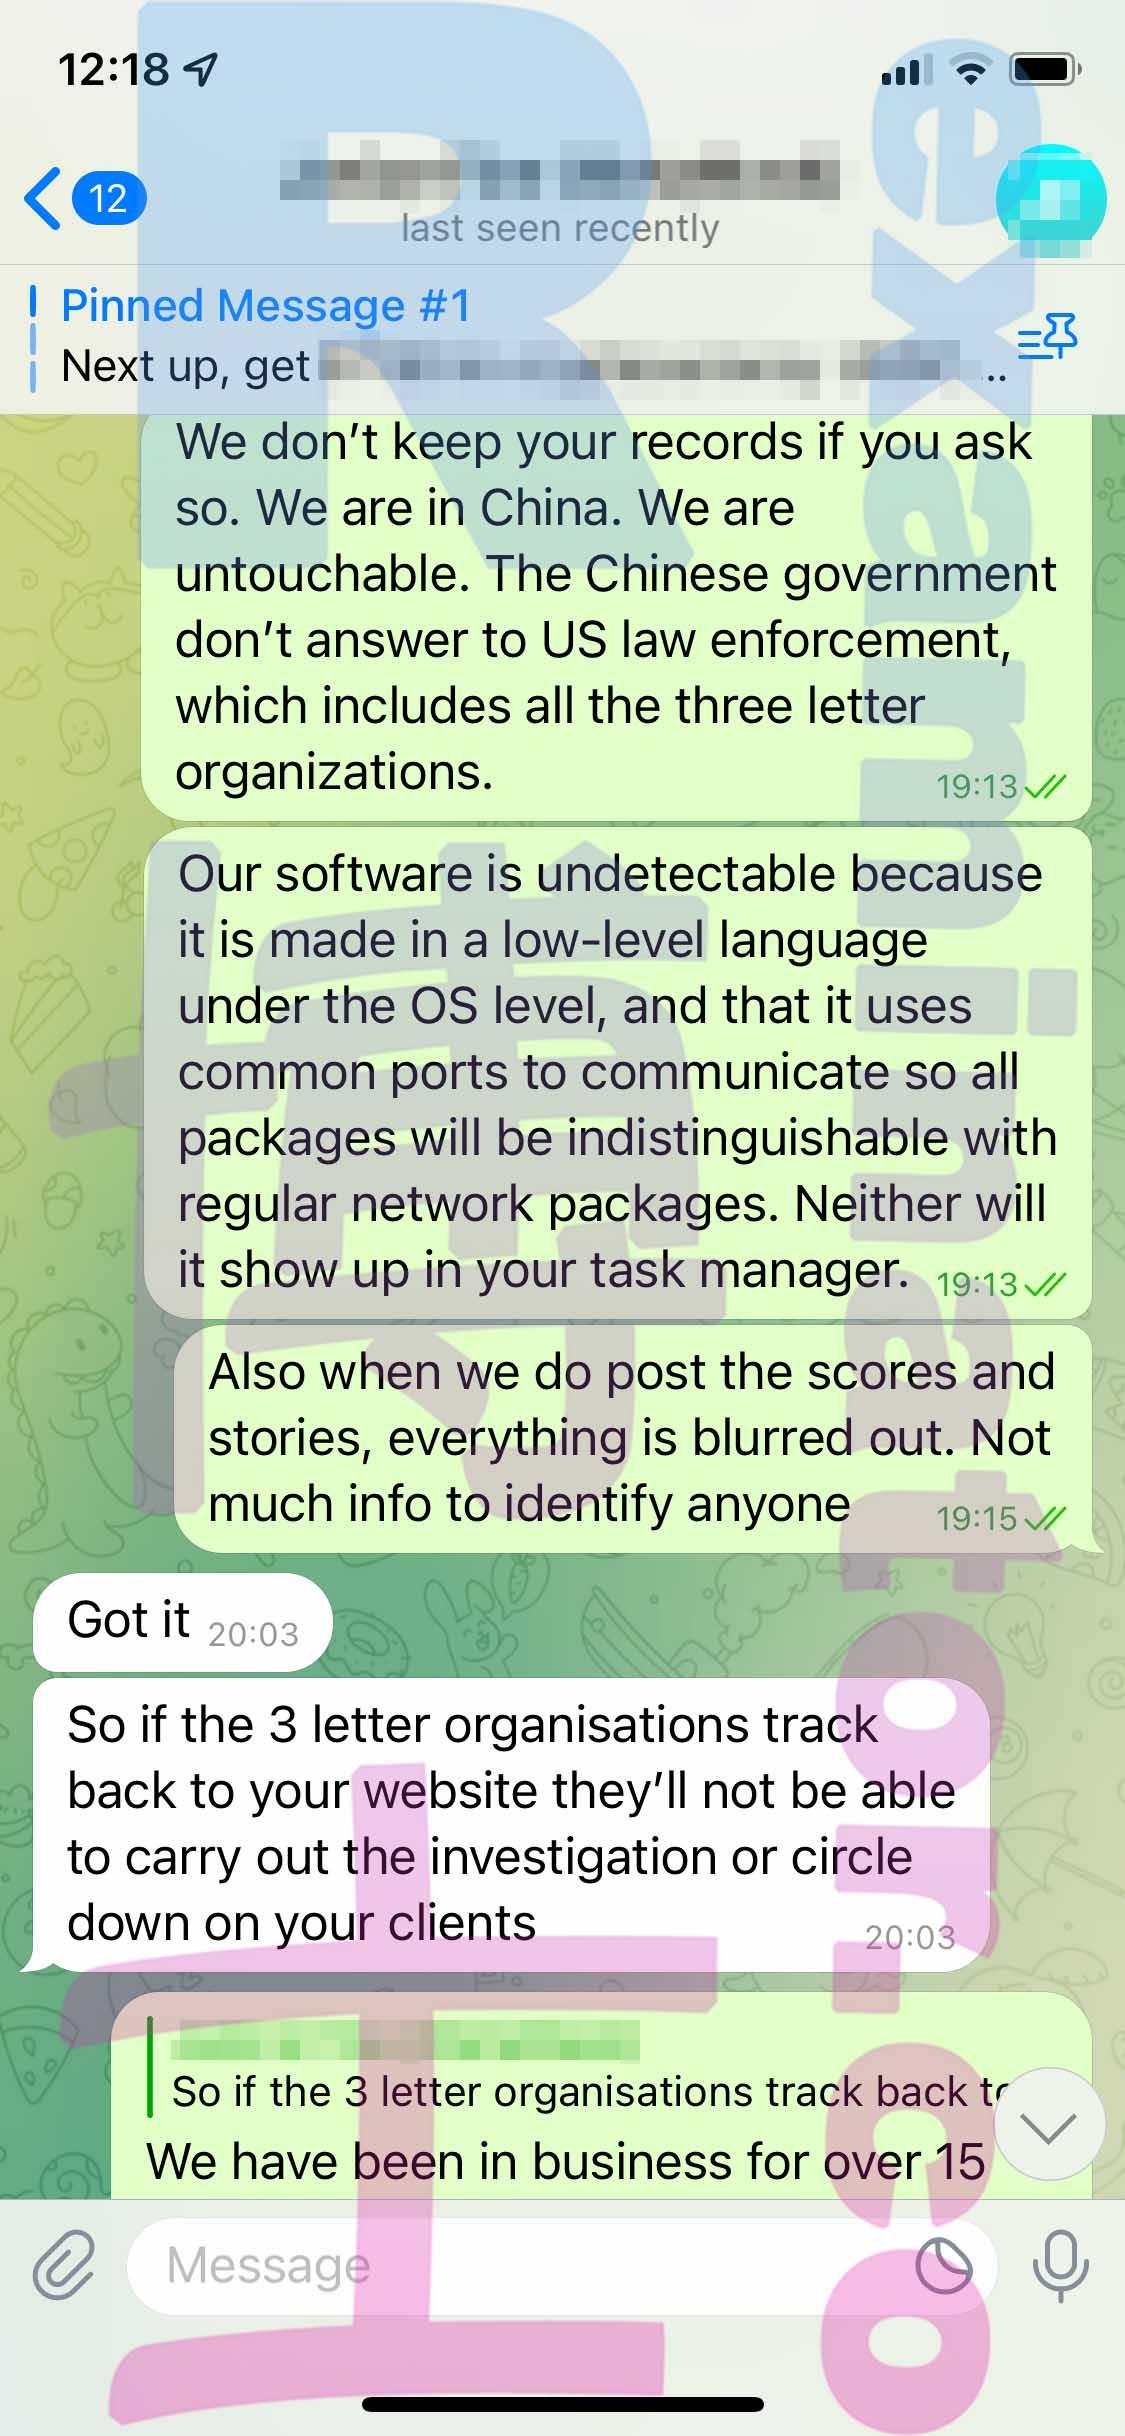 screenshot of chat logs for [GMAT Cheating] success story #302